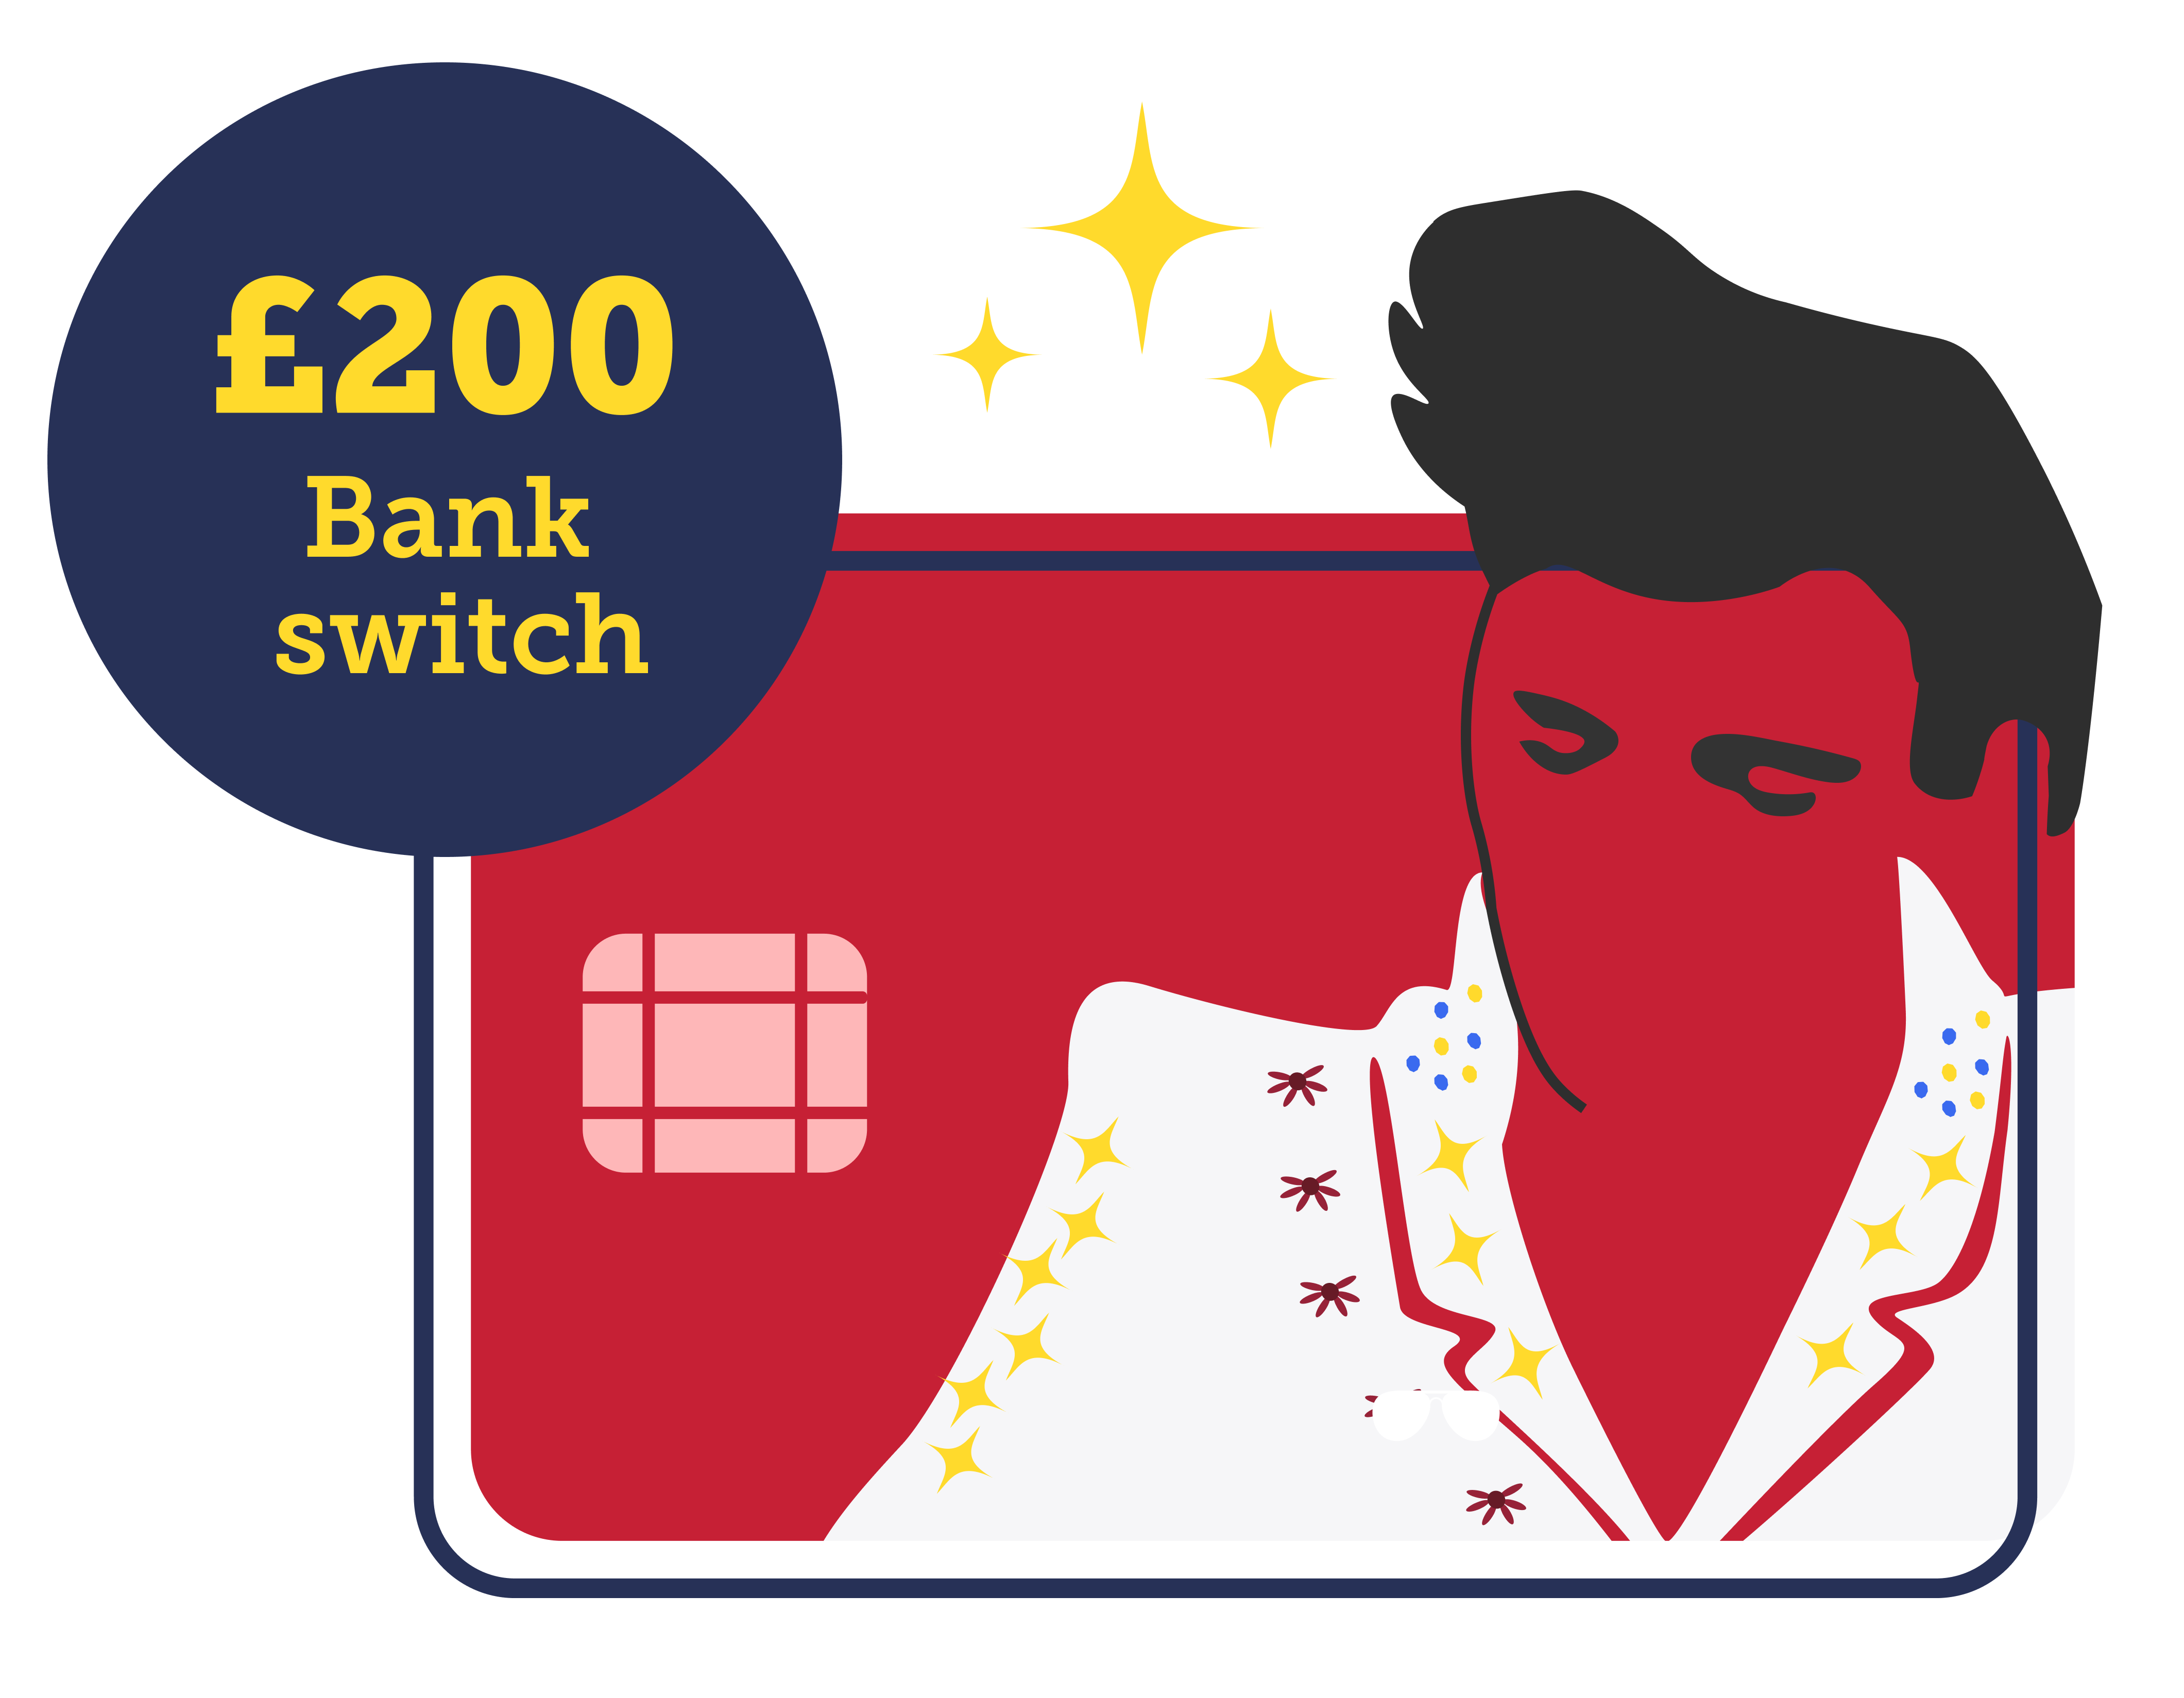 Earn £200 by switching bank. The image links to information about the top bank accounts that pay free cash for switching within our Best bank accounts guide.